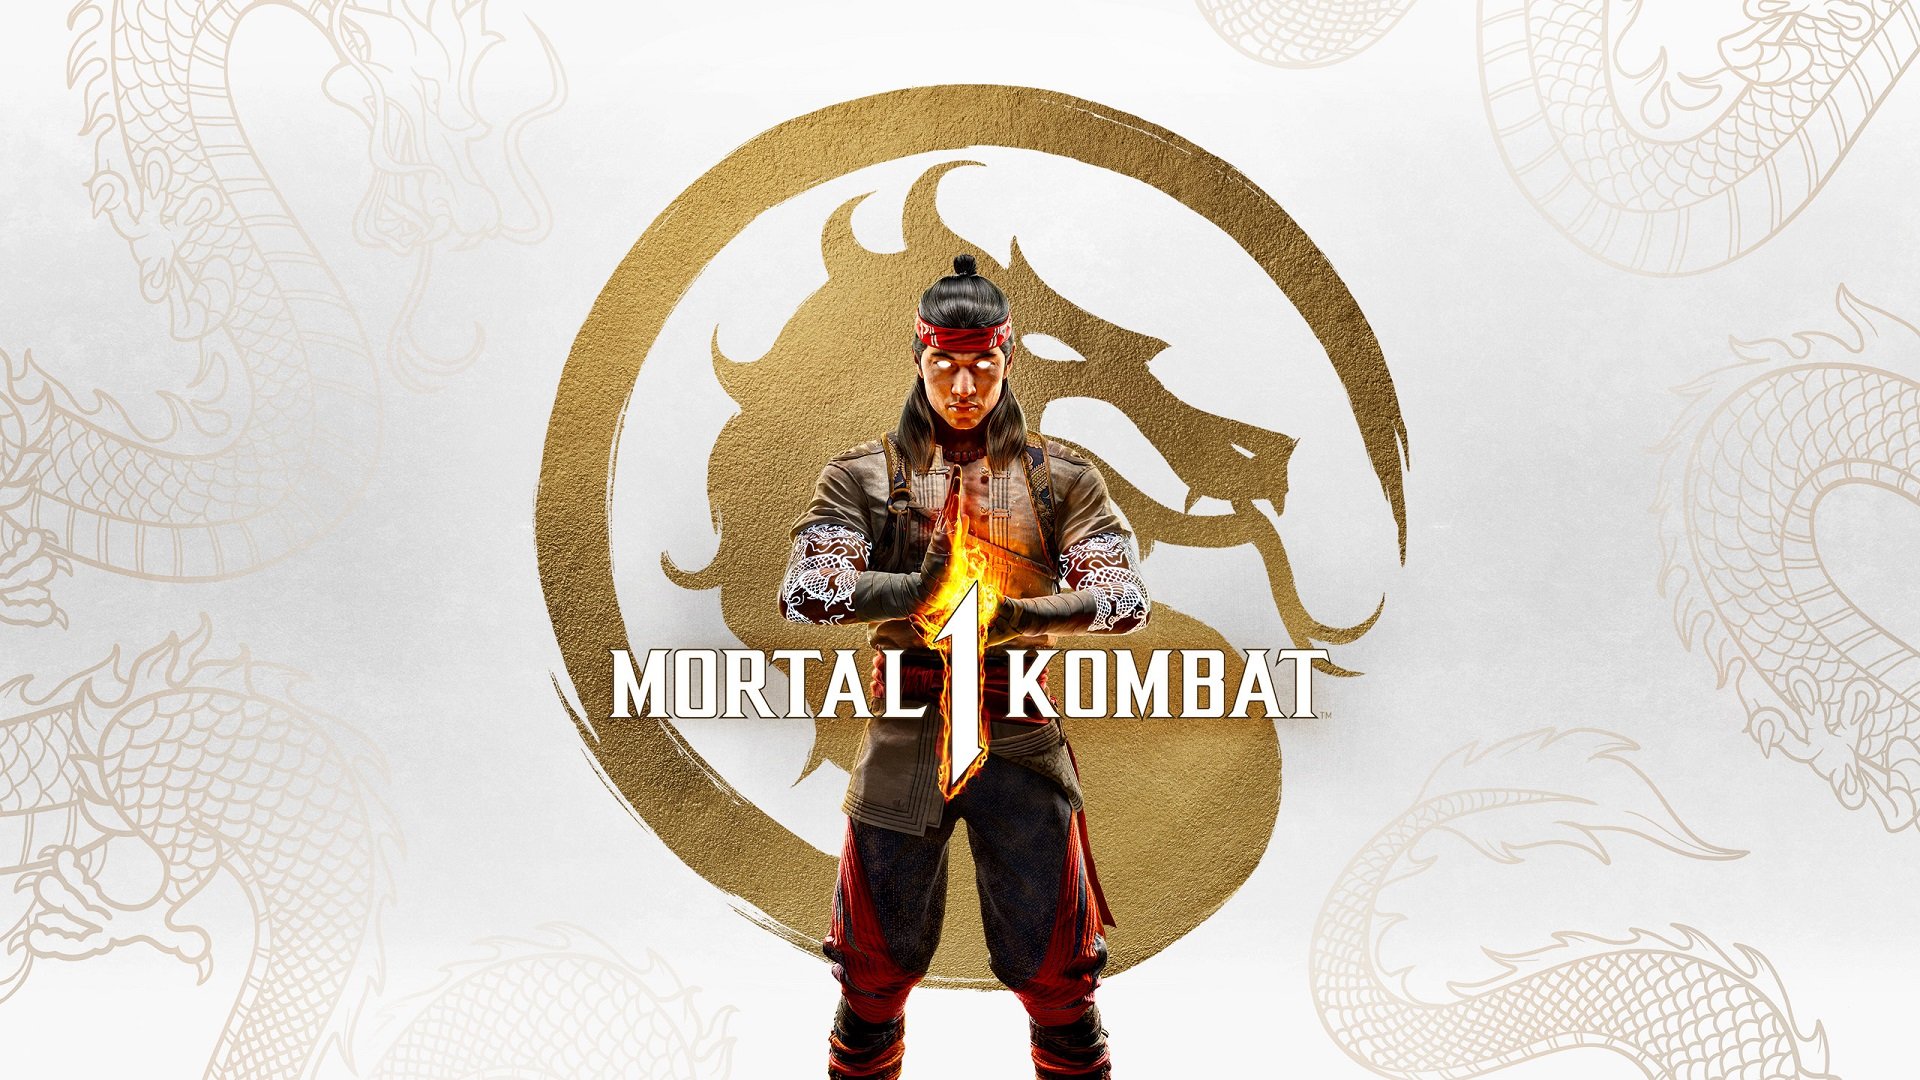 Mortal Kombat 1 Beta Schedule and Details Announced, Available for